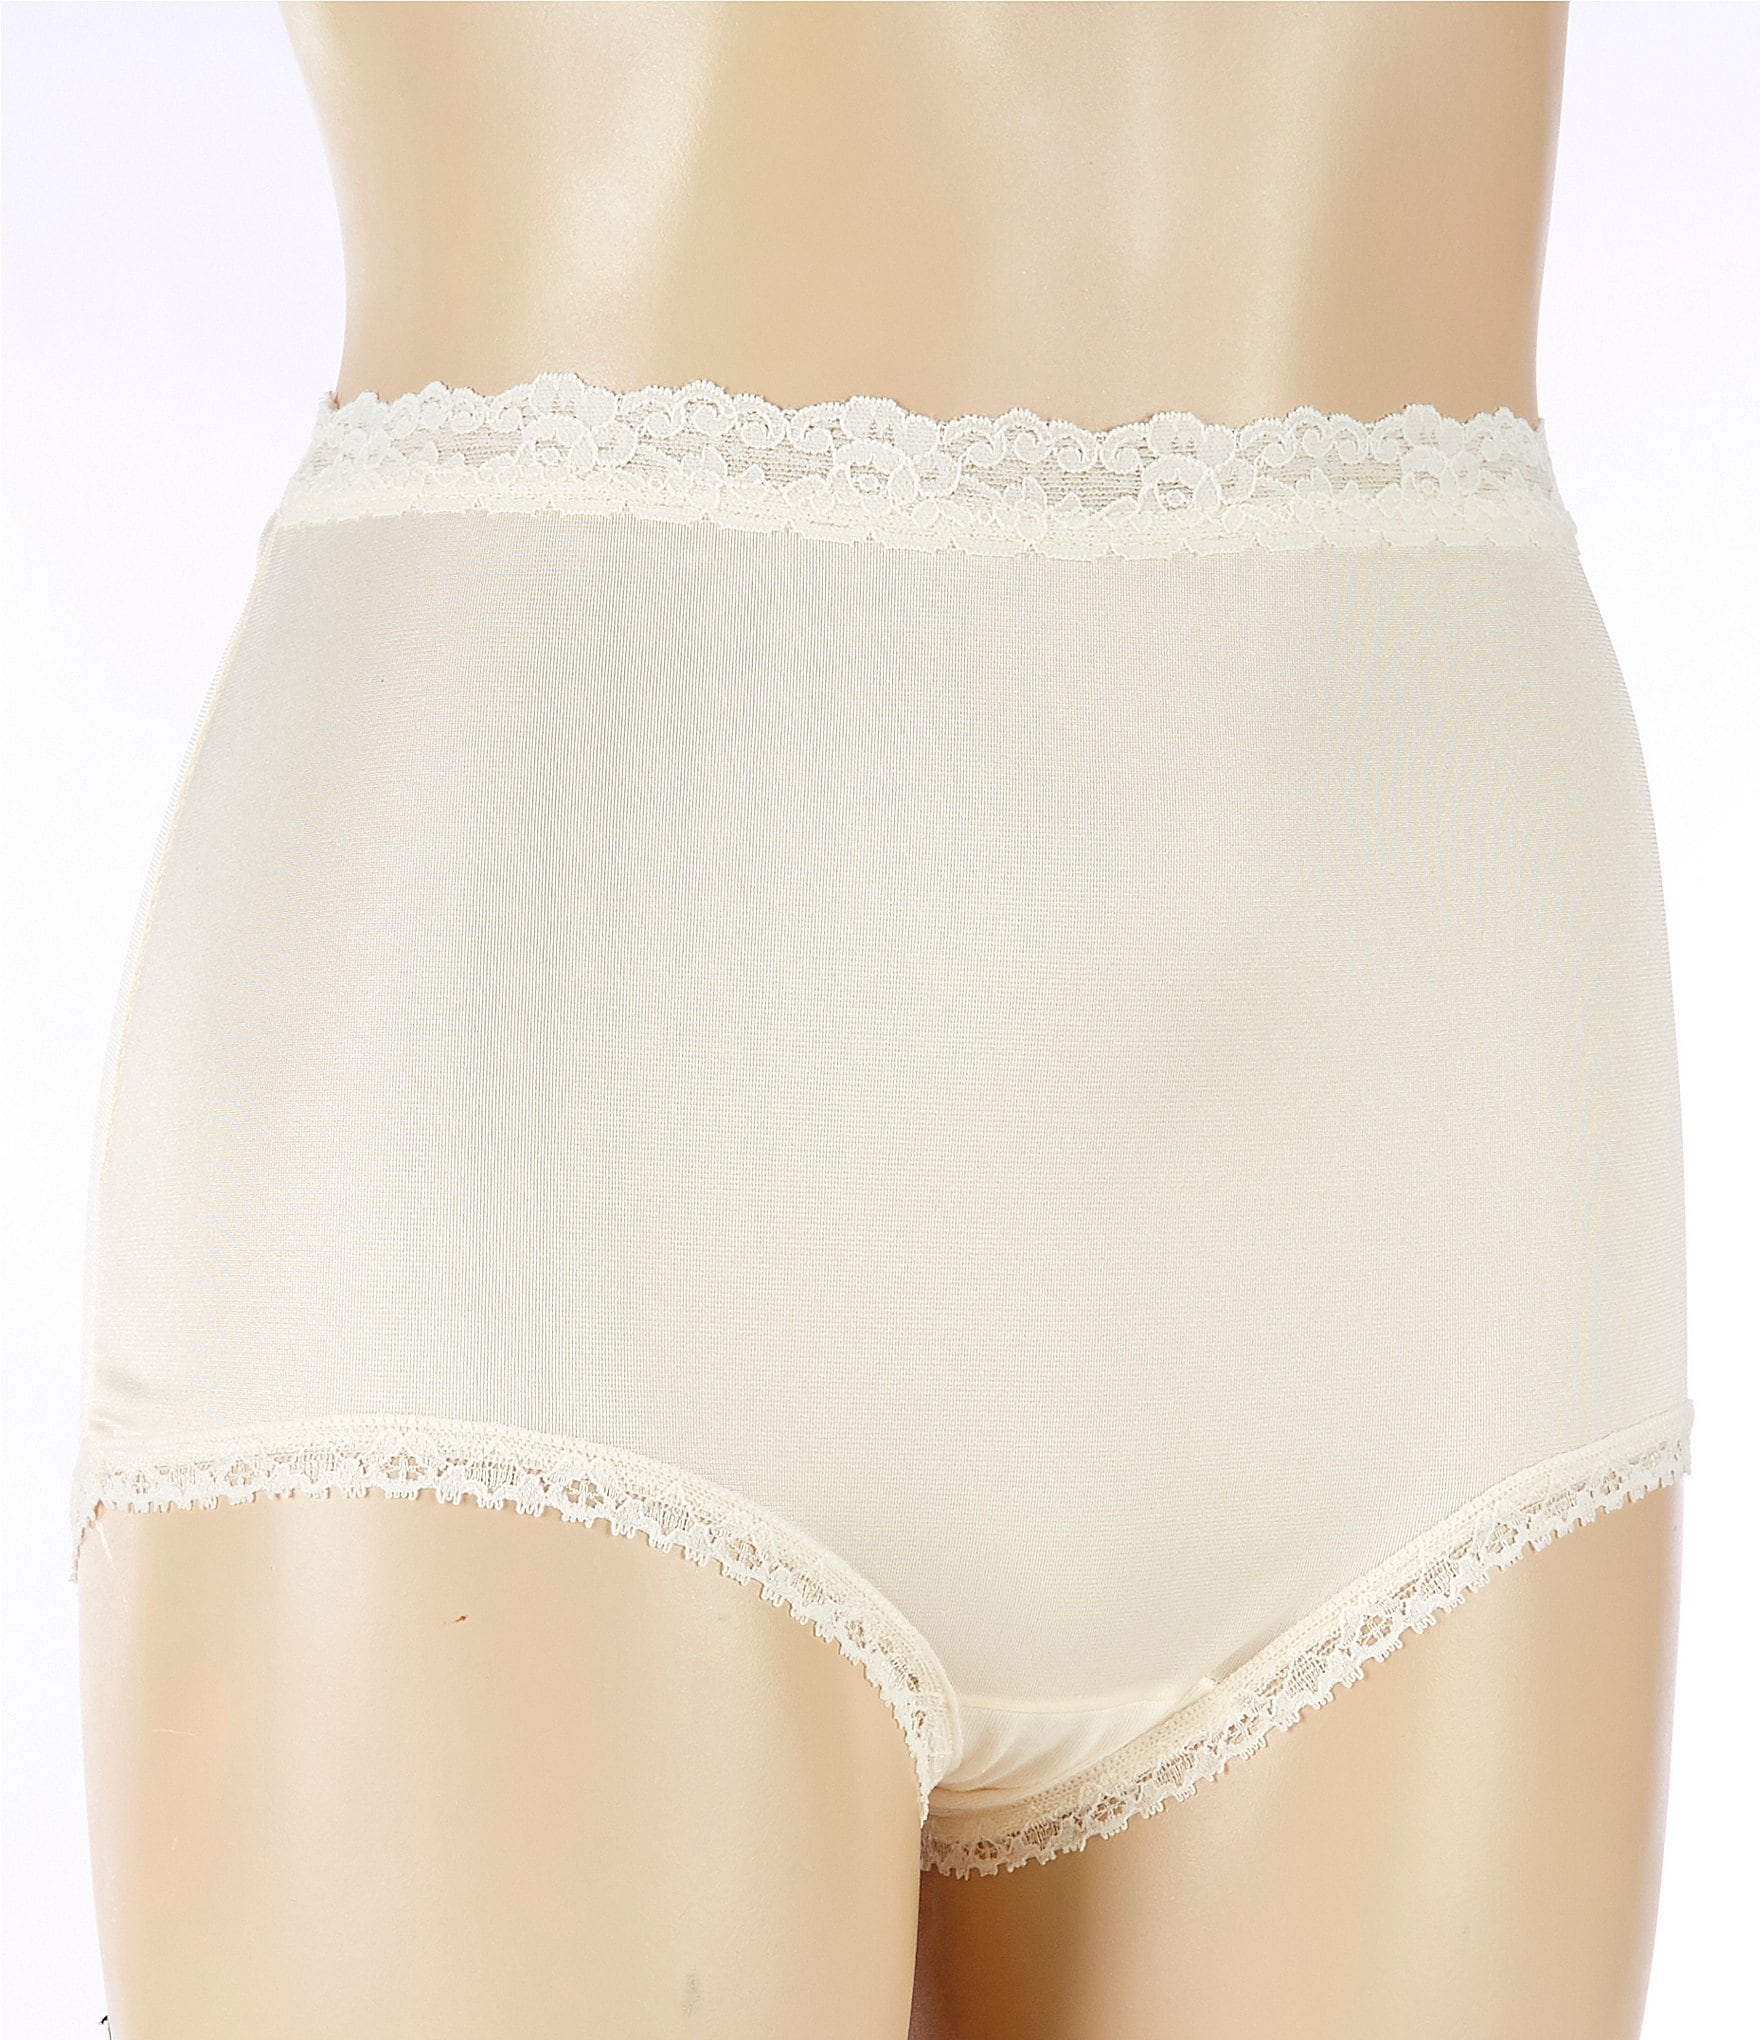 Butter & Lace High Waisted Brief Panty